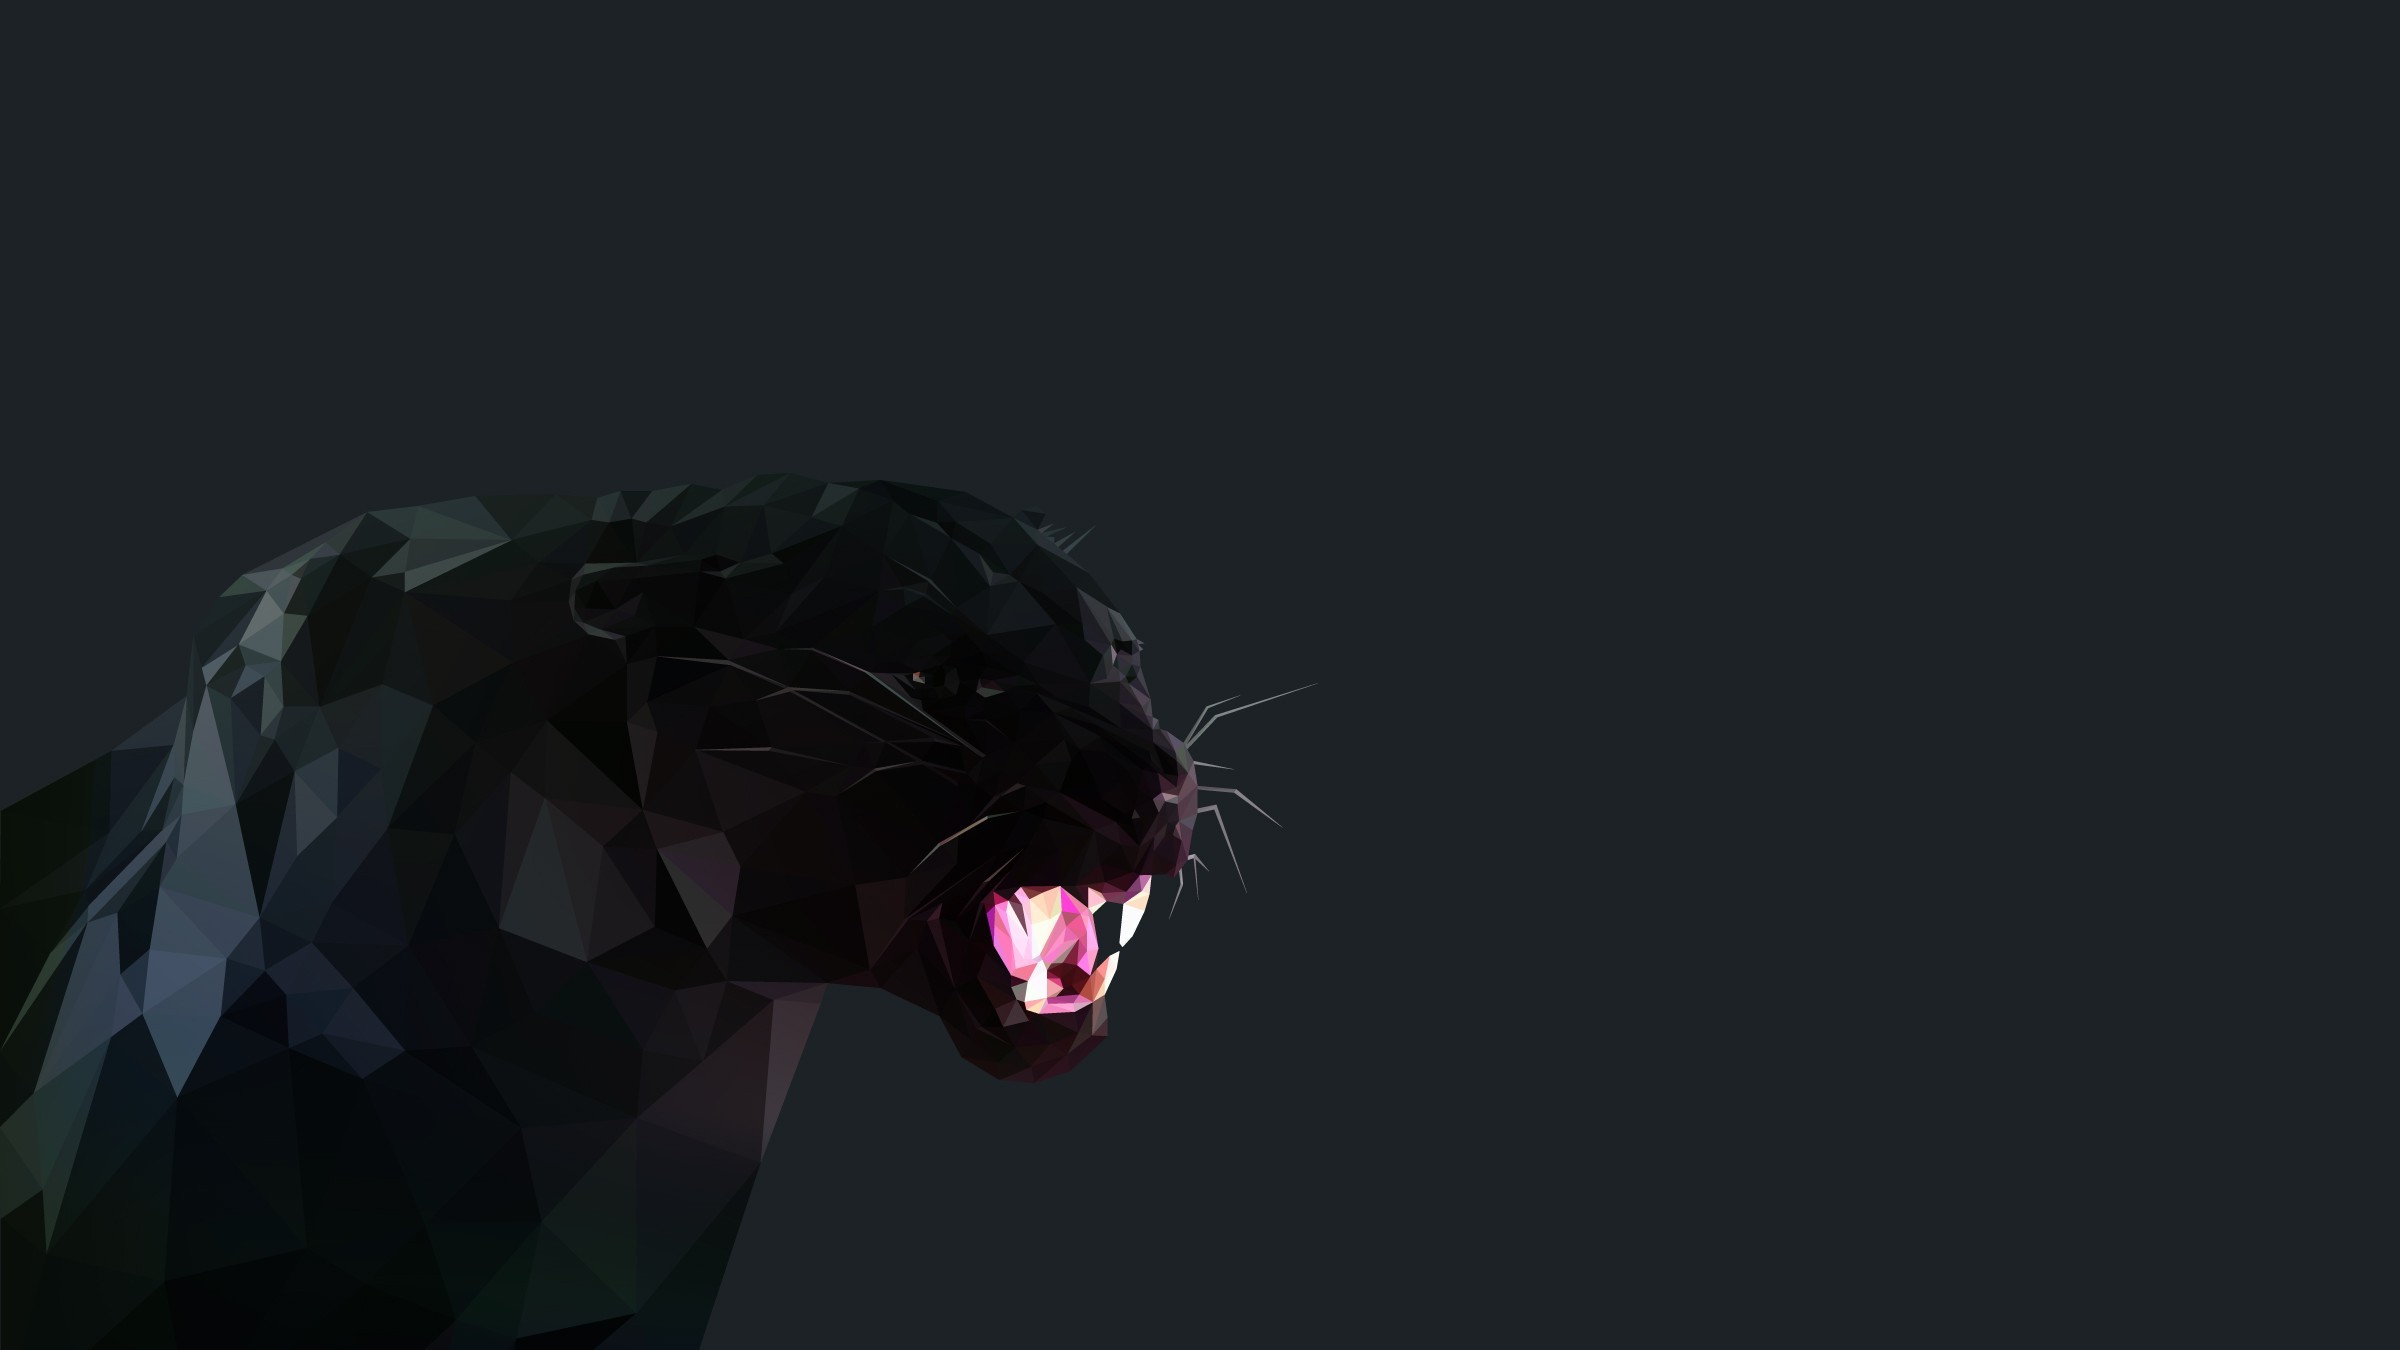 black panther cat low poly Wallpapers HD / Desktop and Mobile Backgrounds